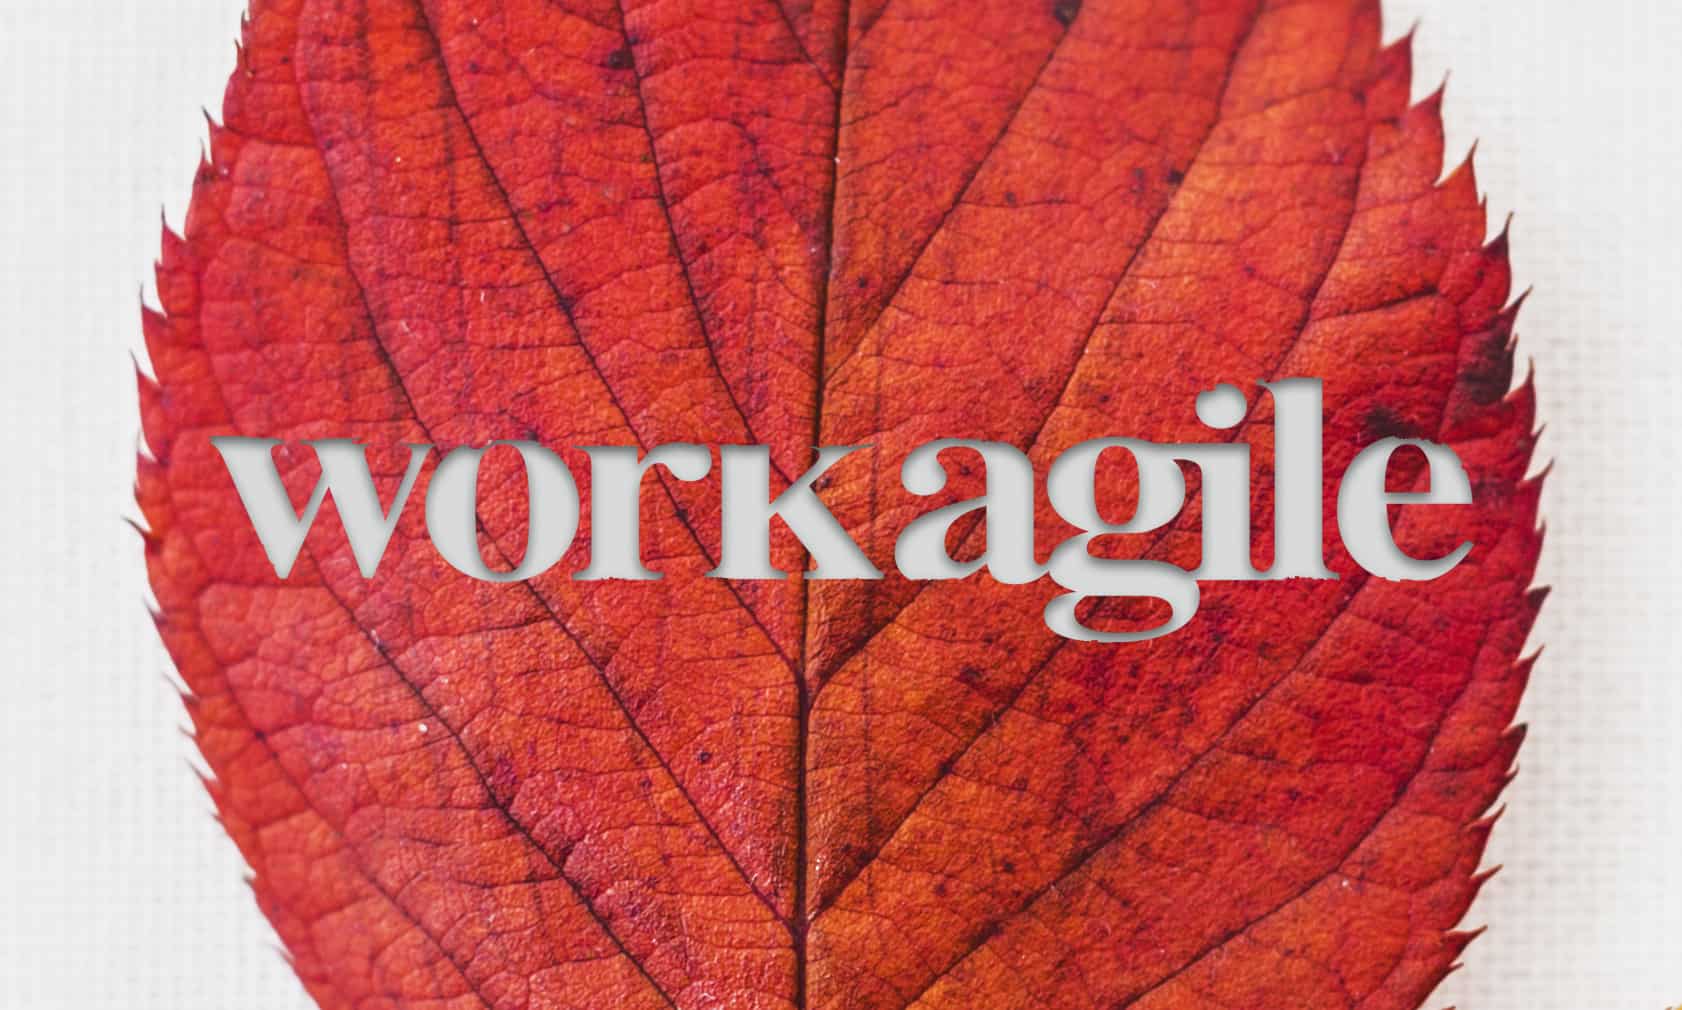 Workagile logo etched in an autumn leaf